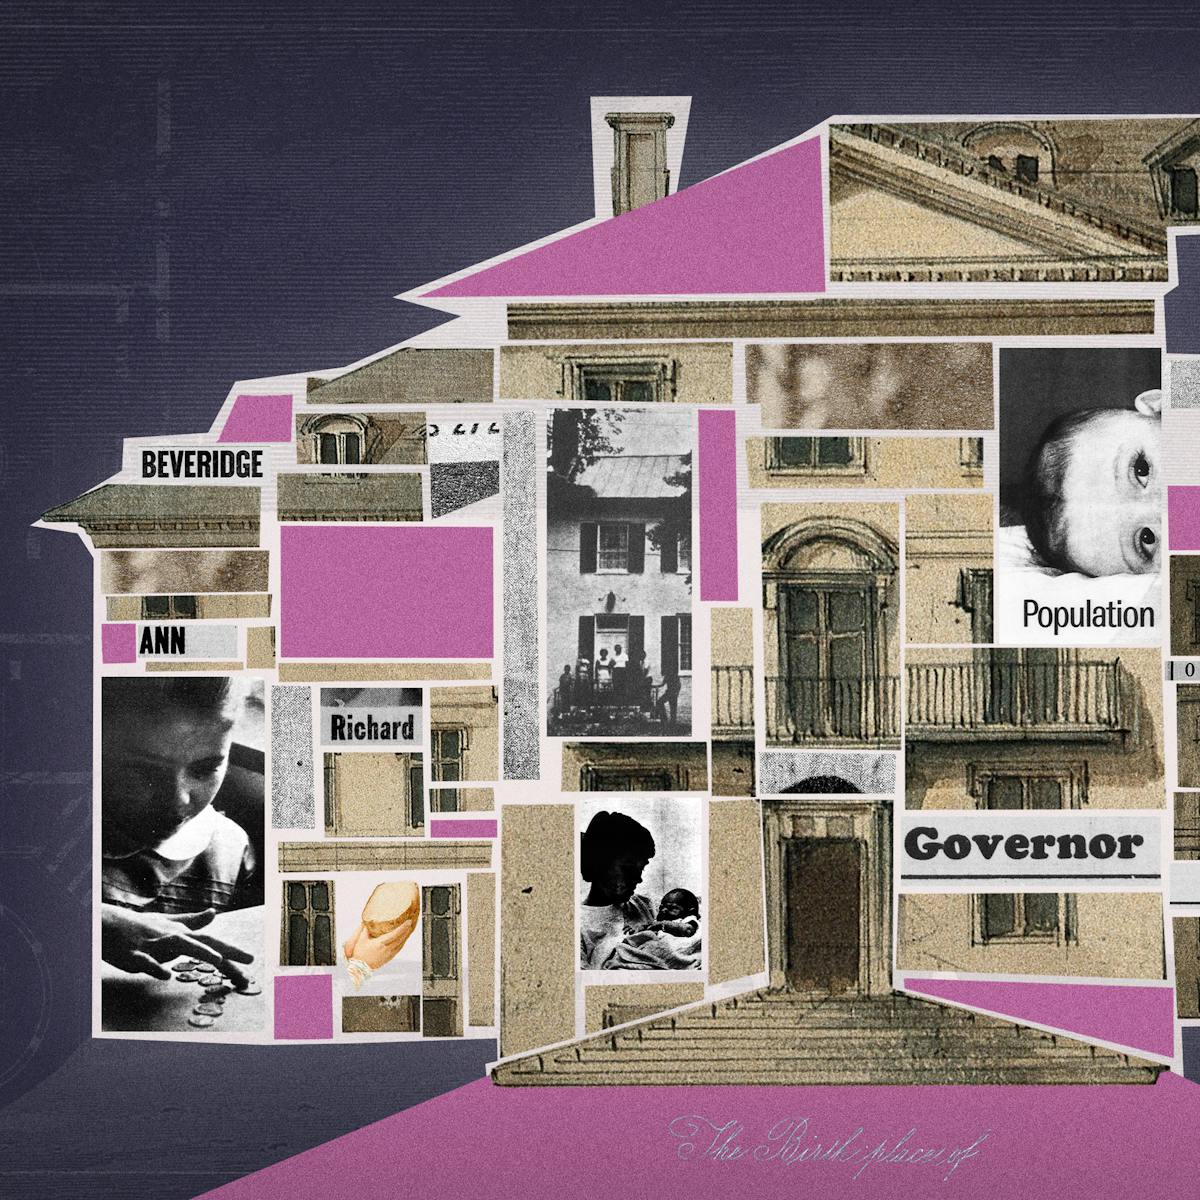 Colourful digital collage. Shown is a building, labelled 'The Birthplace of'. The building's interior is filled with different collage elements, including newspaper cut-outs reading 'Beveridge', 'Ann', 'Richard', 'Governor', 'Population', 'Oakley', 'William' and 'Mauritius'. There are a number of black and white images, one of a baby lying down, one of a mother holding a baby, one of a child playing with coins on a table, and one of a child holding a bag. There are a number of windows and balconies, a chimney, and a central door with steps leading down from it. 